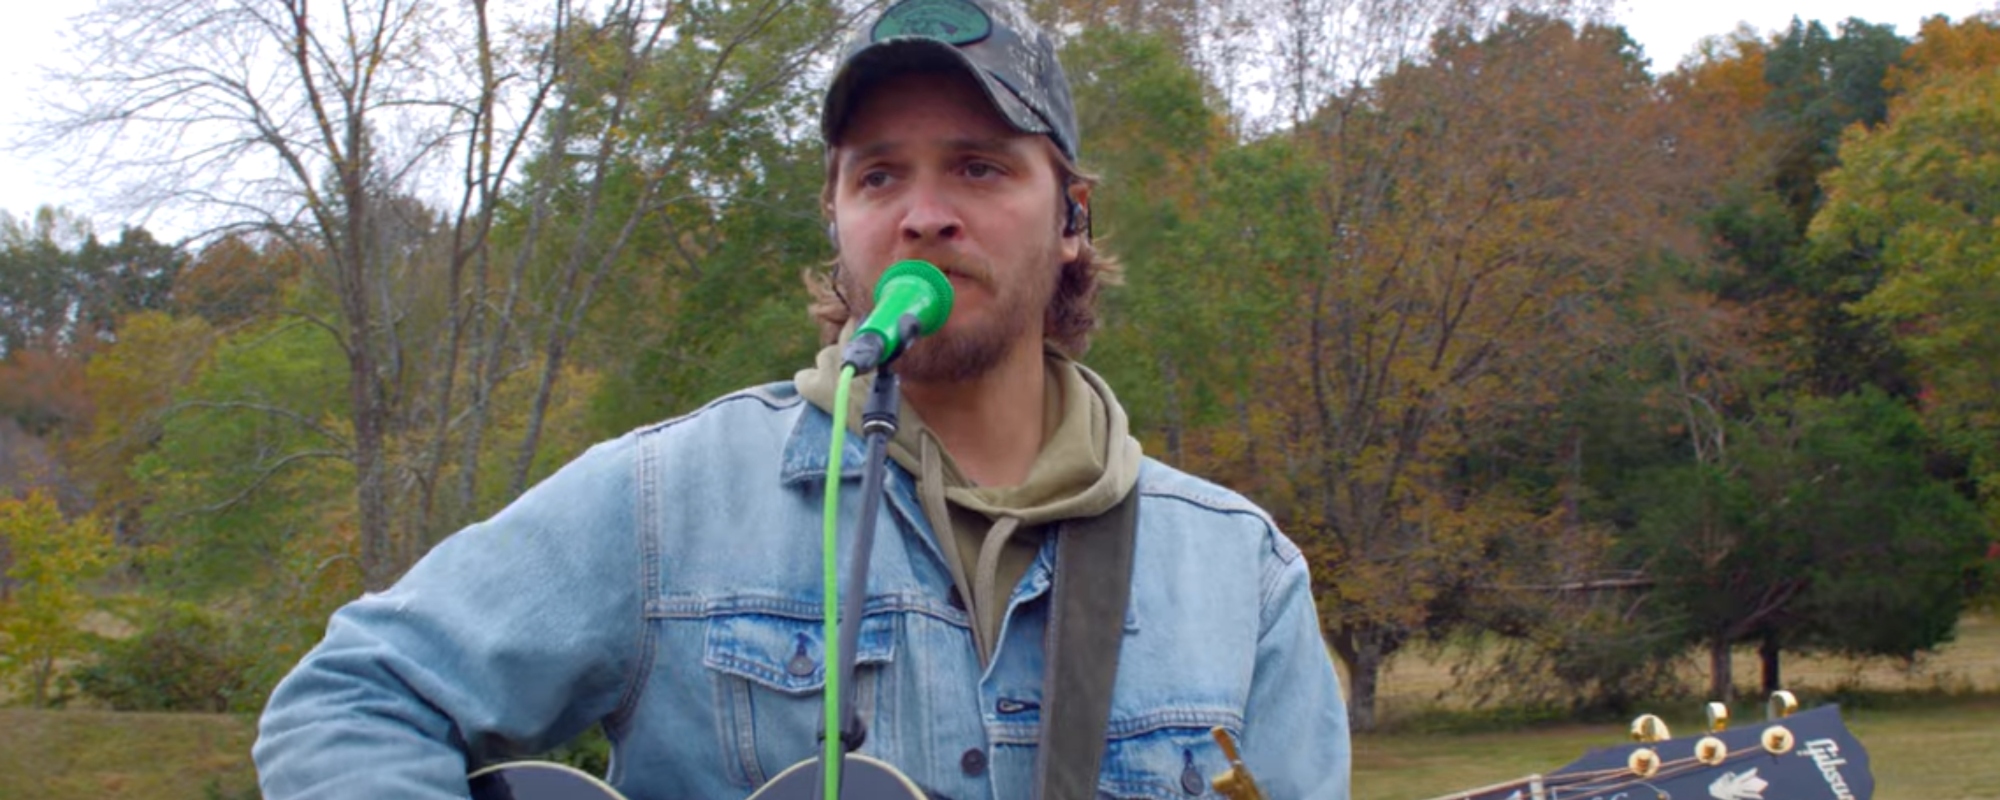 Watch ‘Yellowstone’ Star Luke Grimes Let It “Burn” with Powerful Acoustic Live Performance